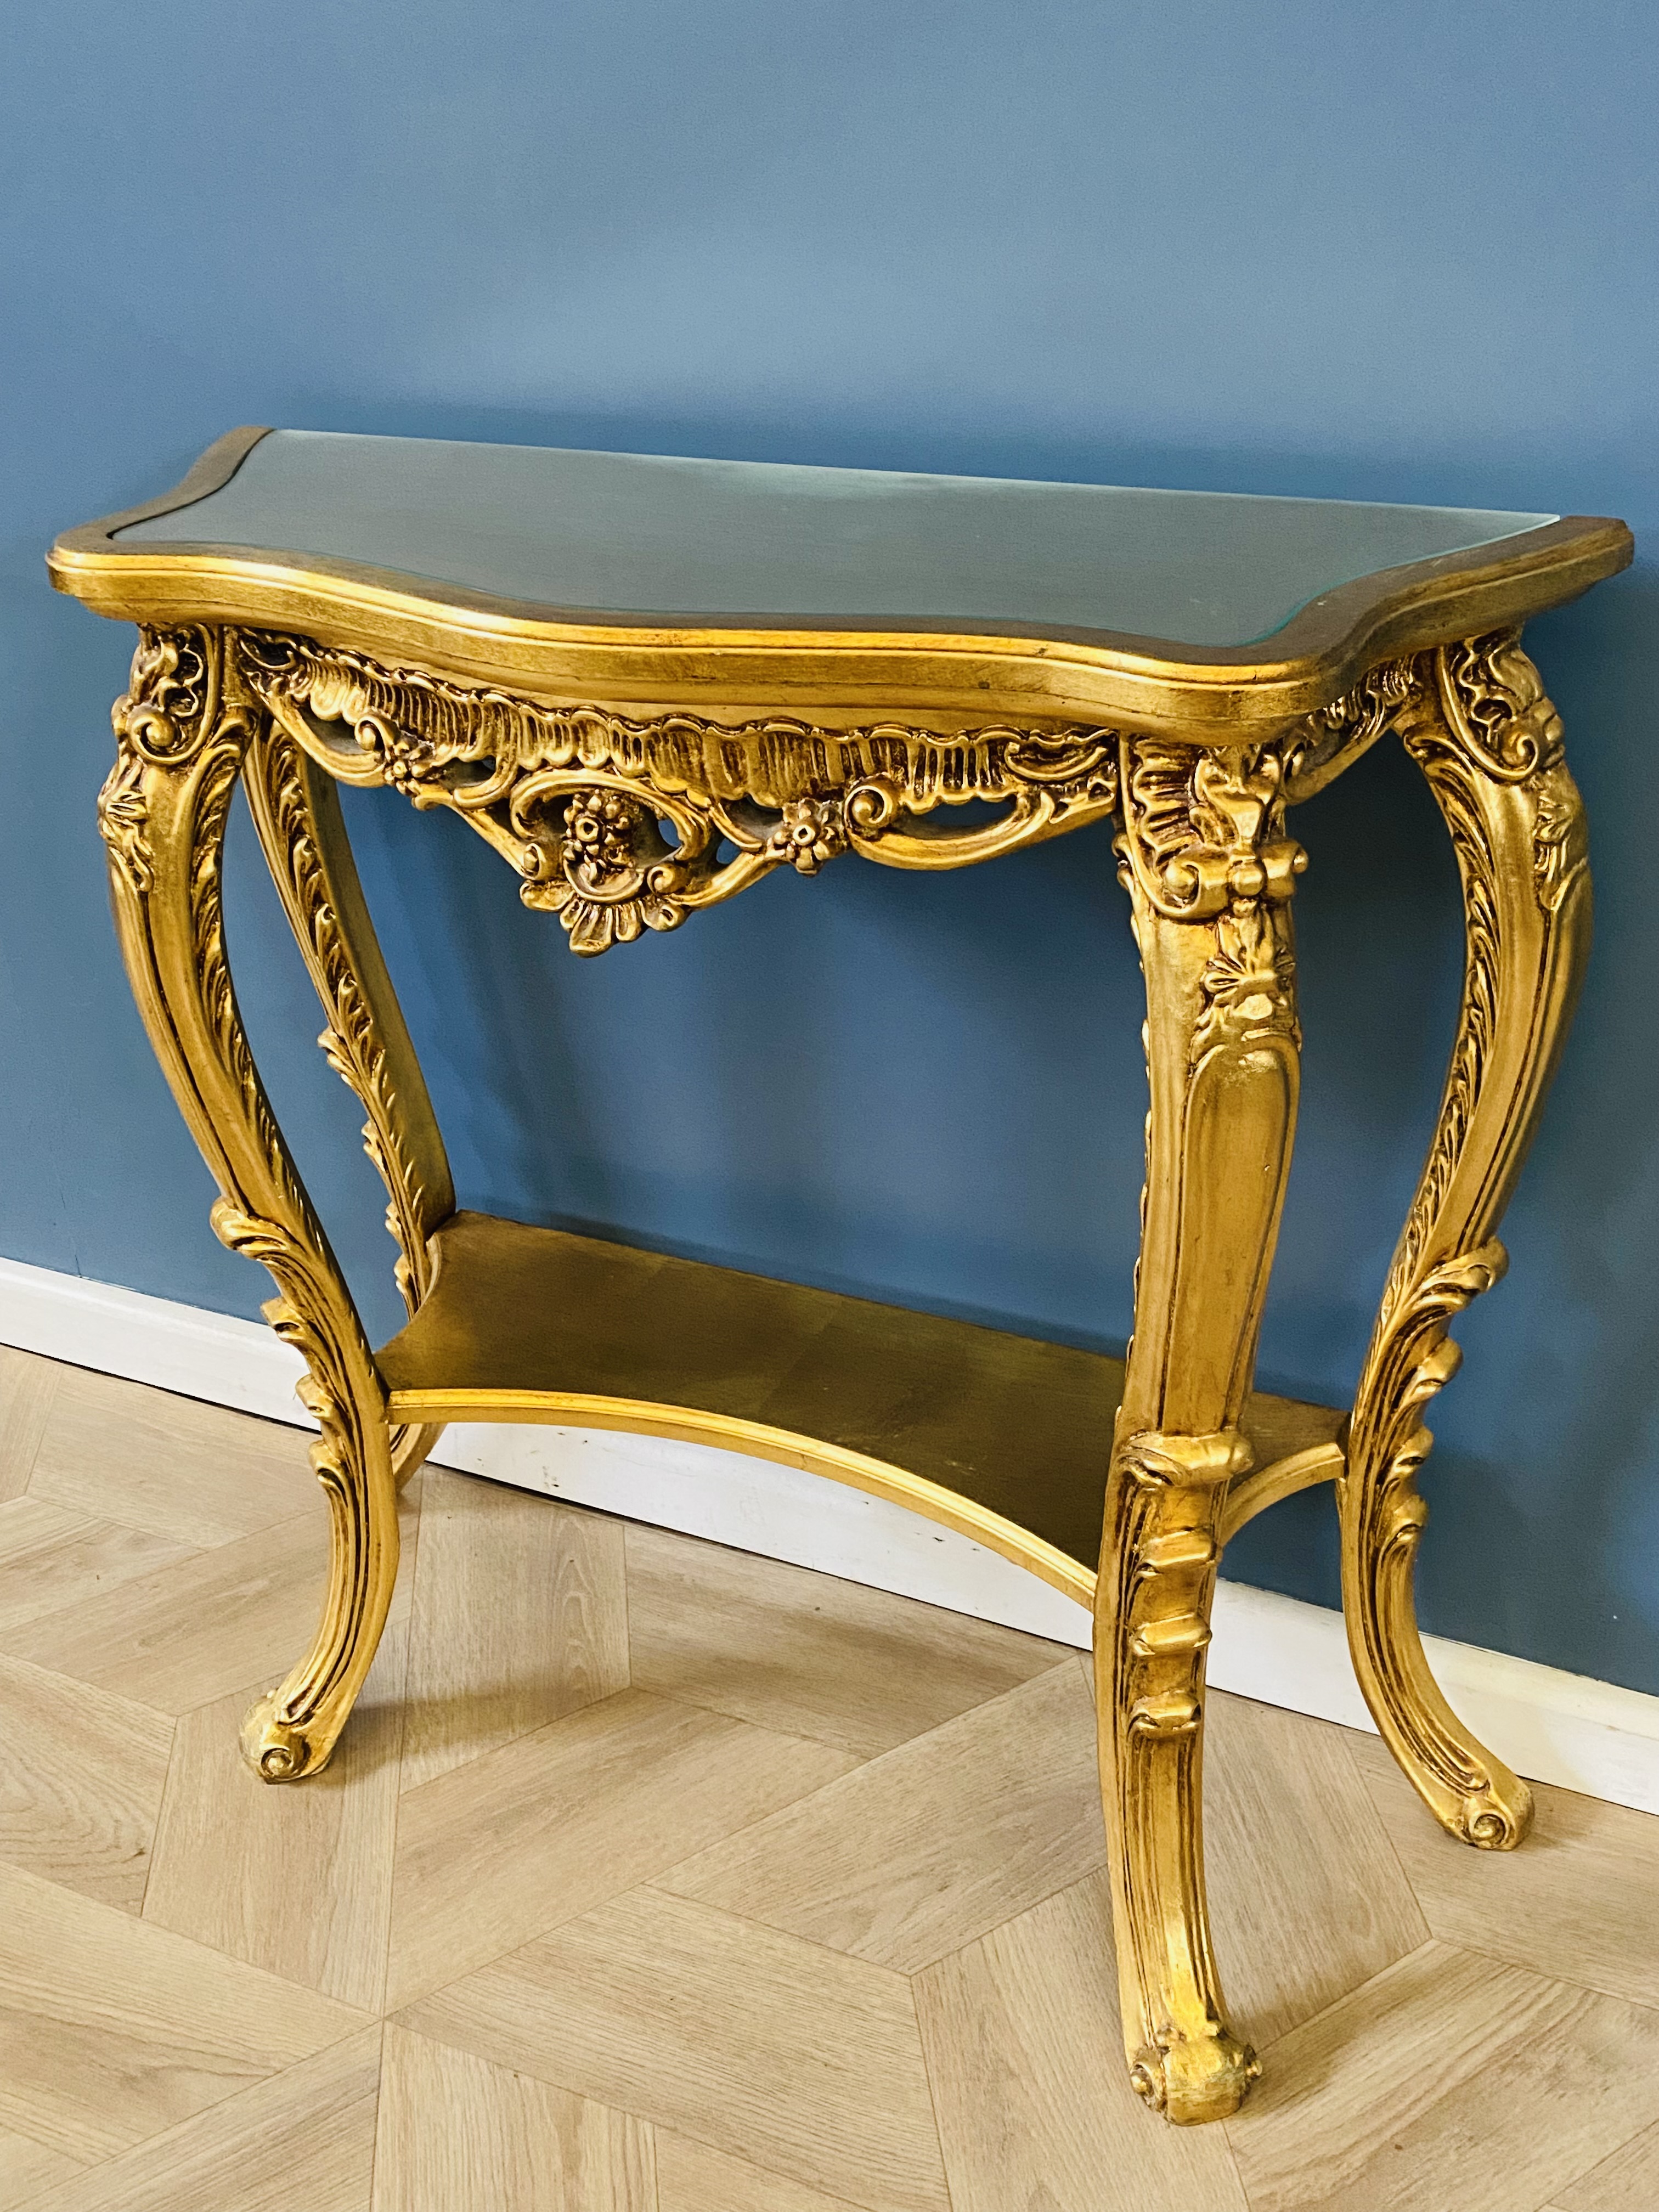 Serpentine carved giltwood console table - Image 4 of 7